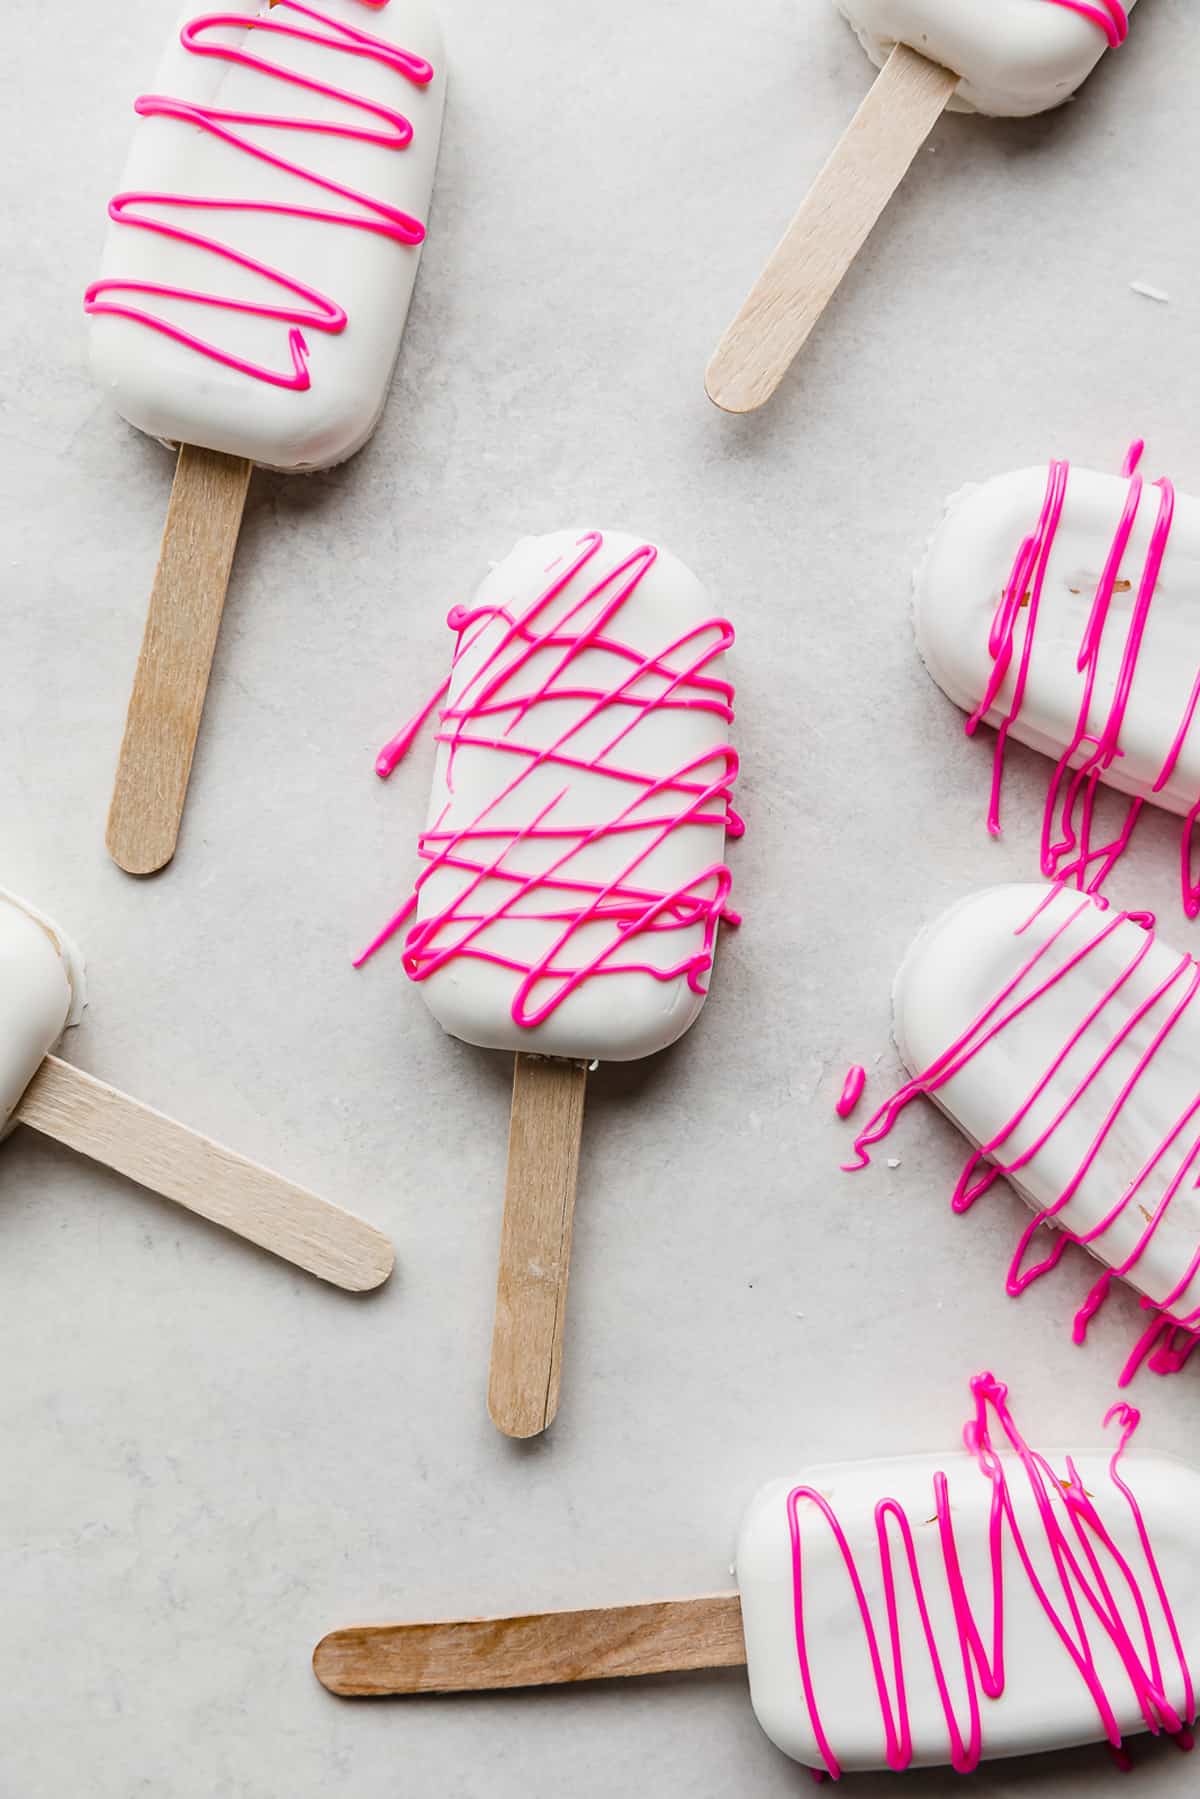 White chocolate Cakesicles drizzled with hot pink chocolate, on a white background.